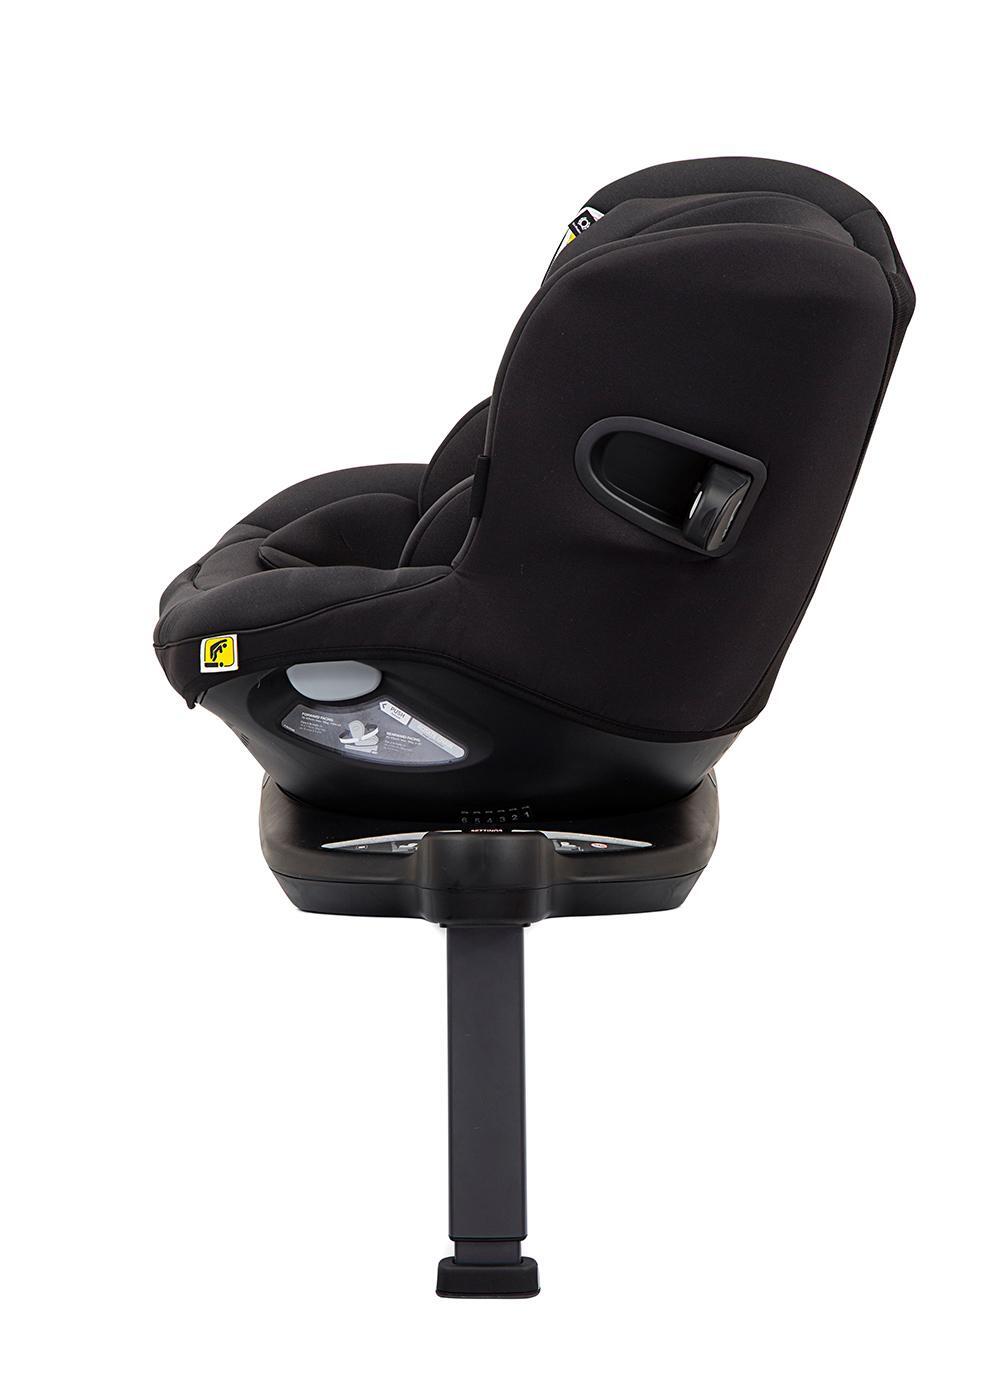 Joie I-Spin 360 Car Seat - Deep Sea - From Birth with Rotation! unisex  (bambini)